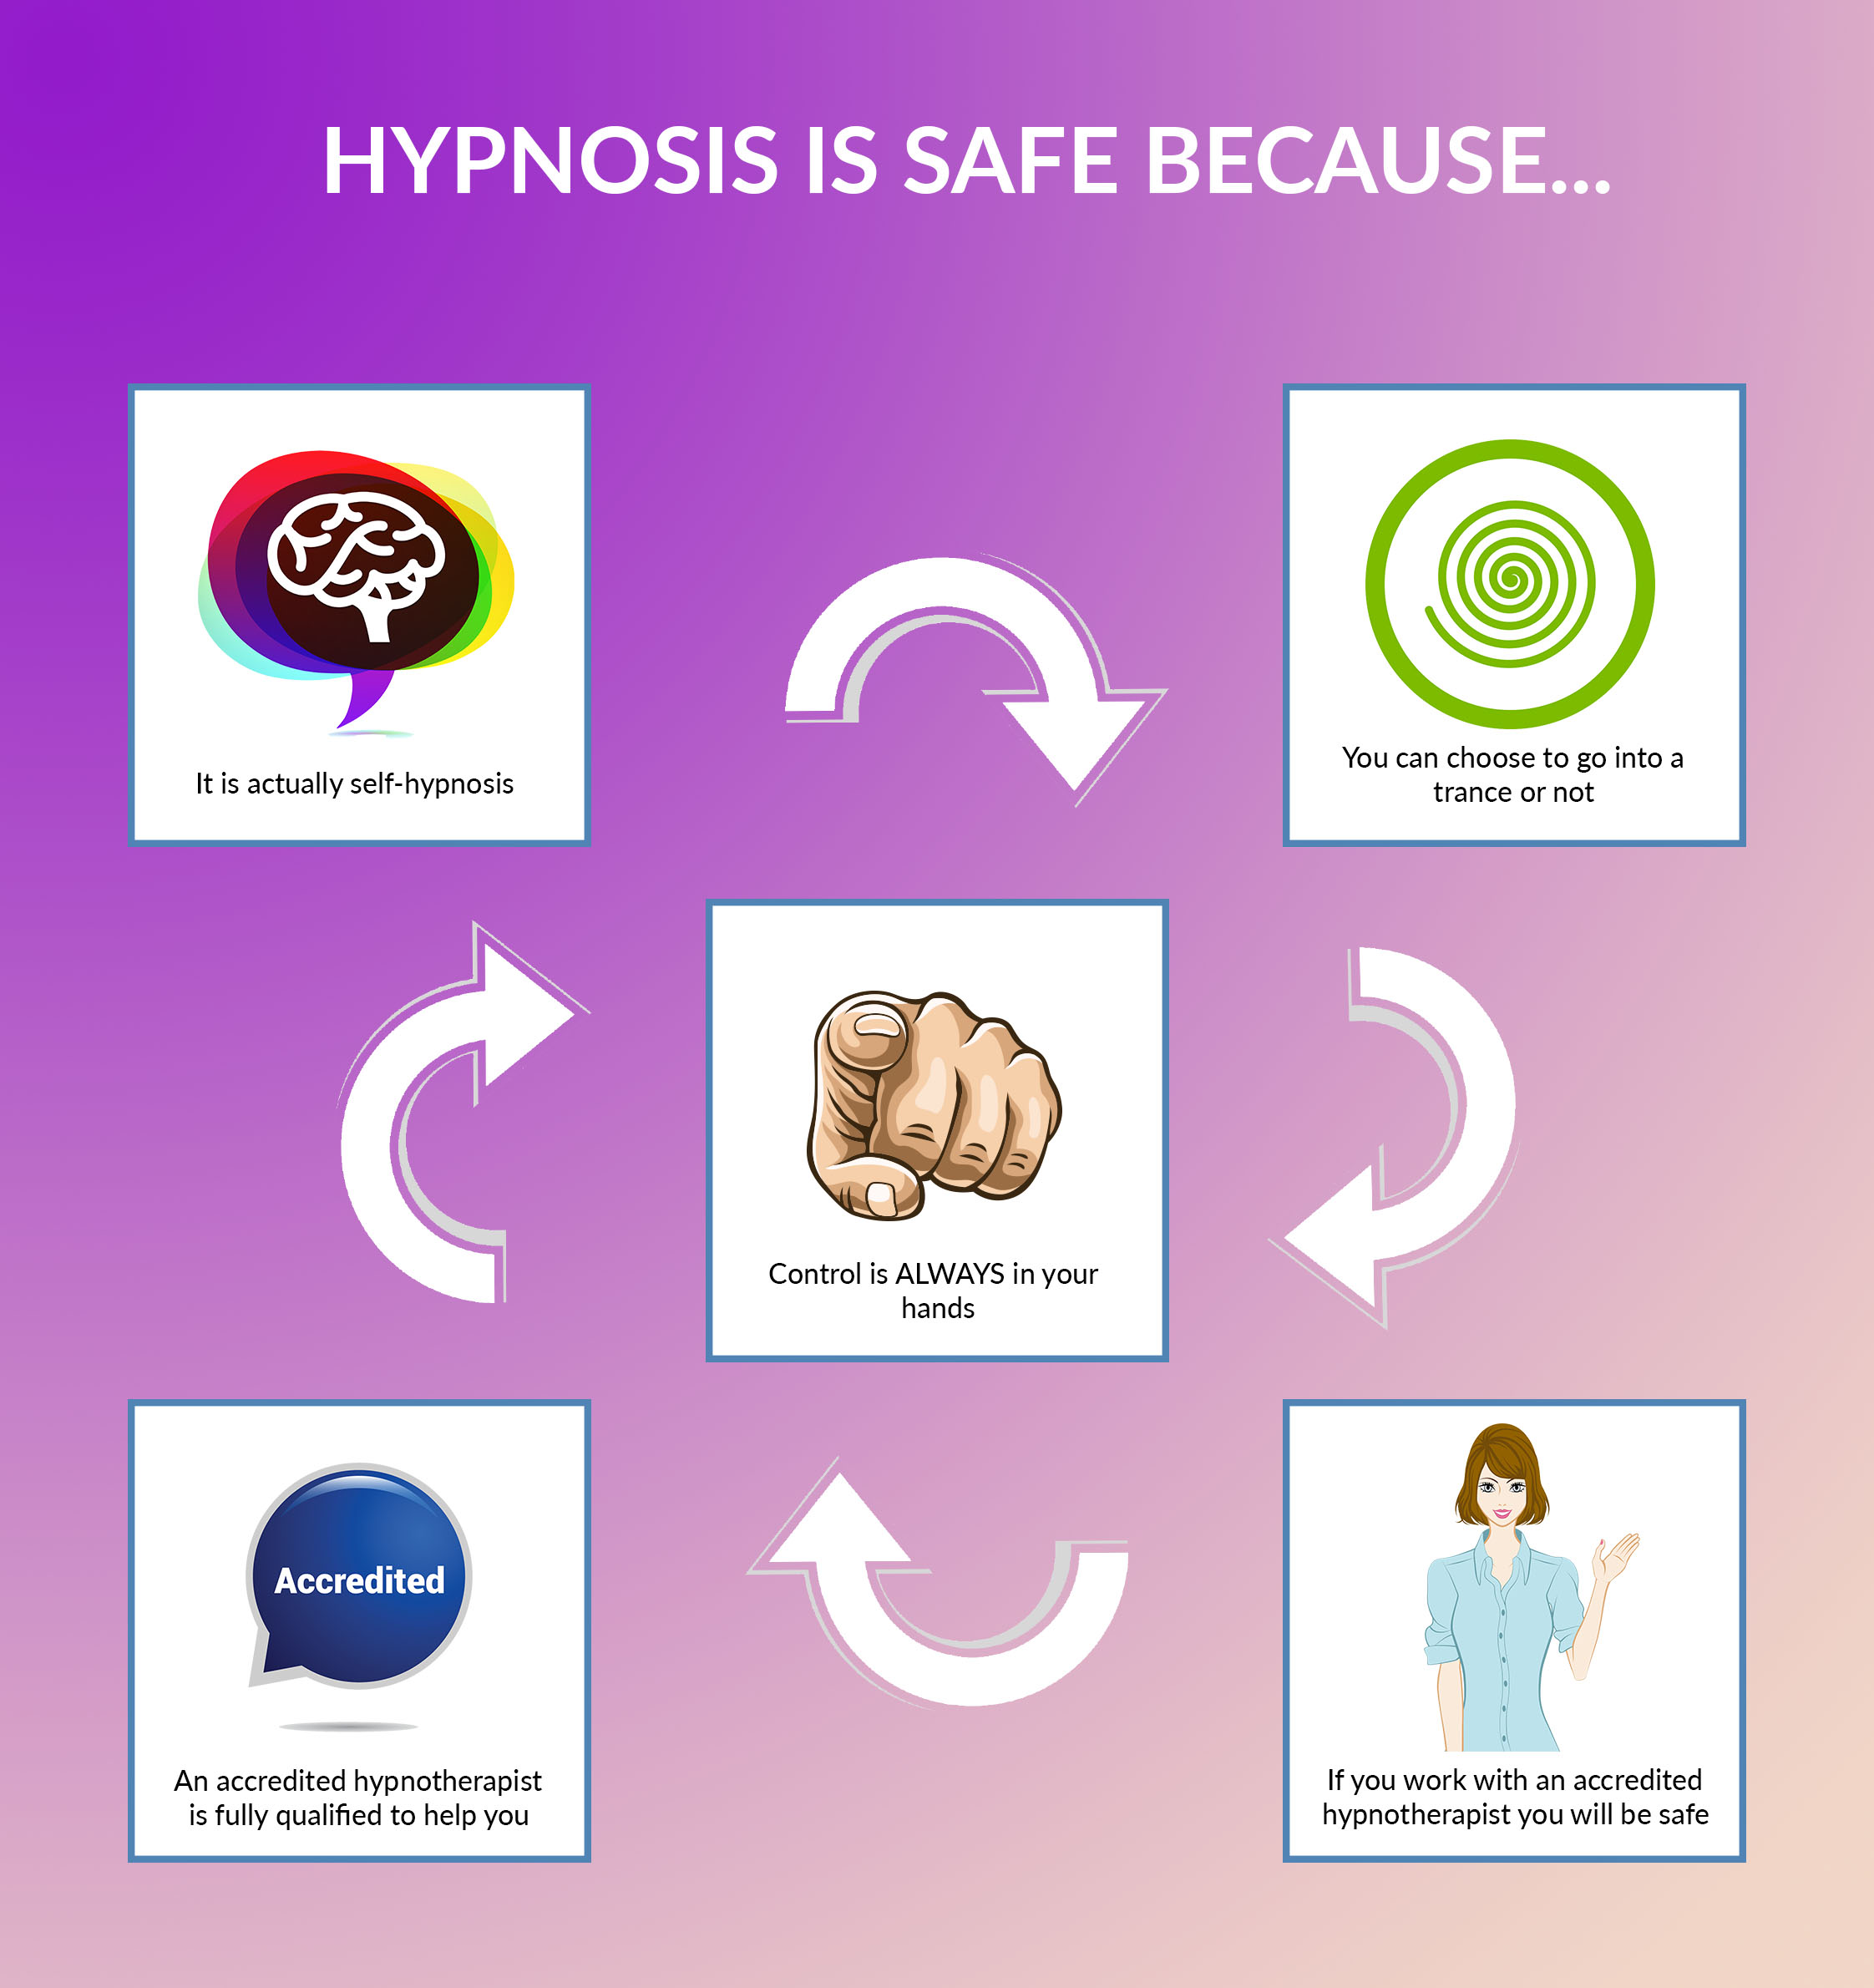 Why clinical hypnosis is a safe modality